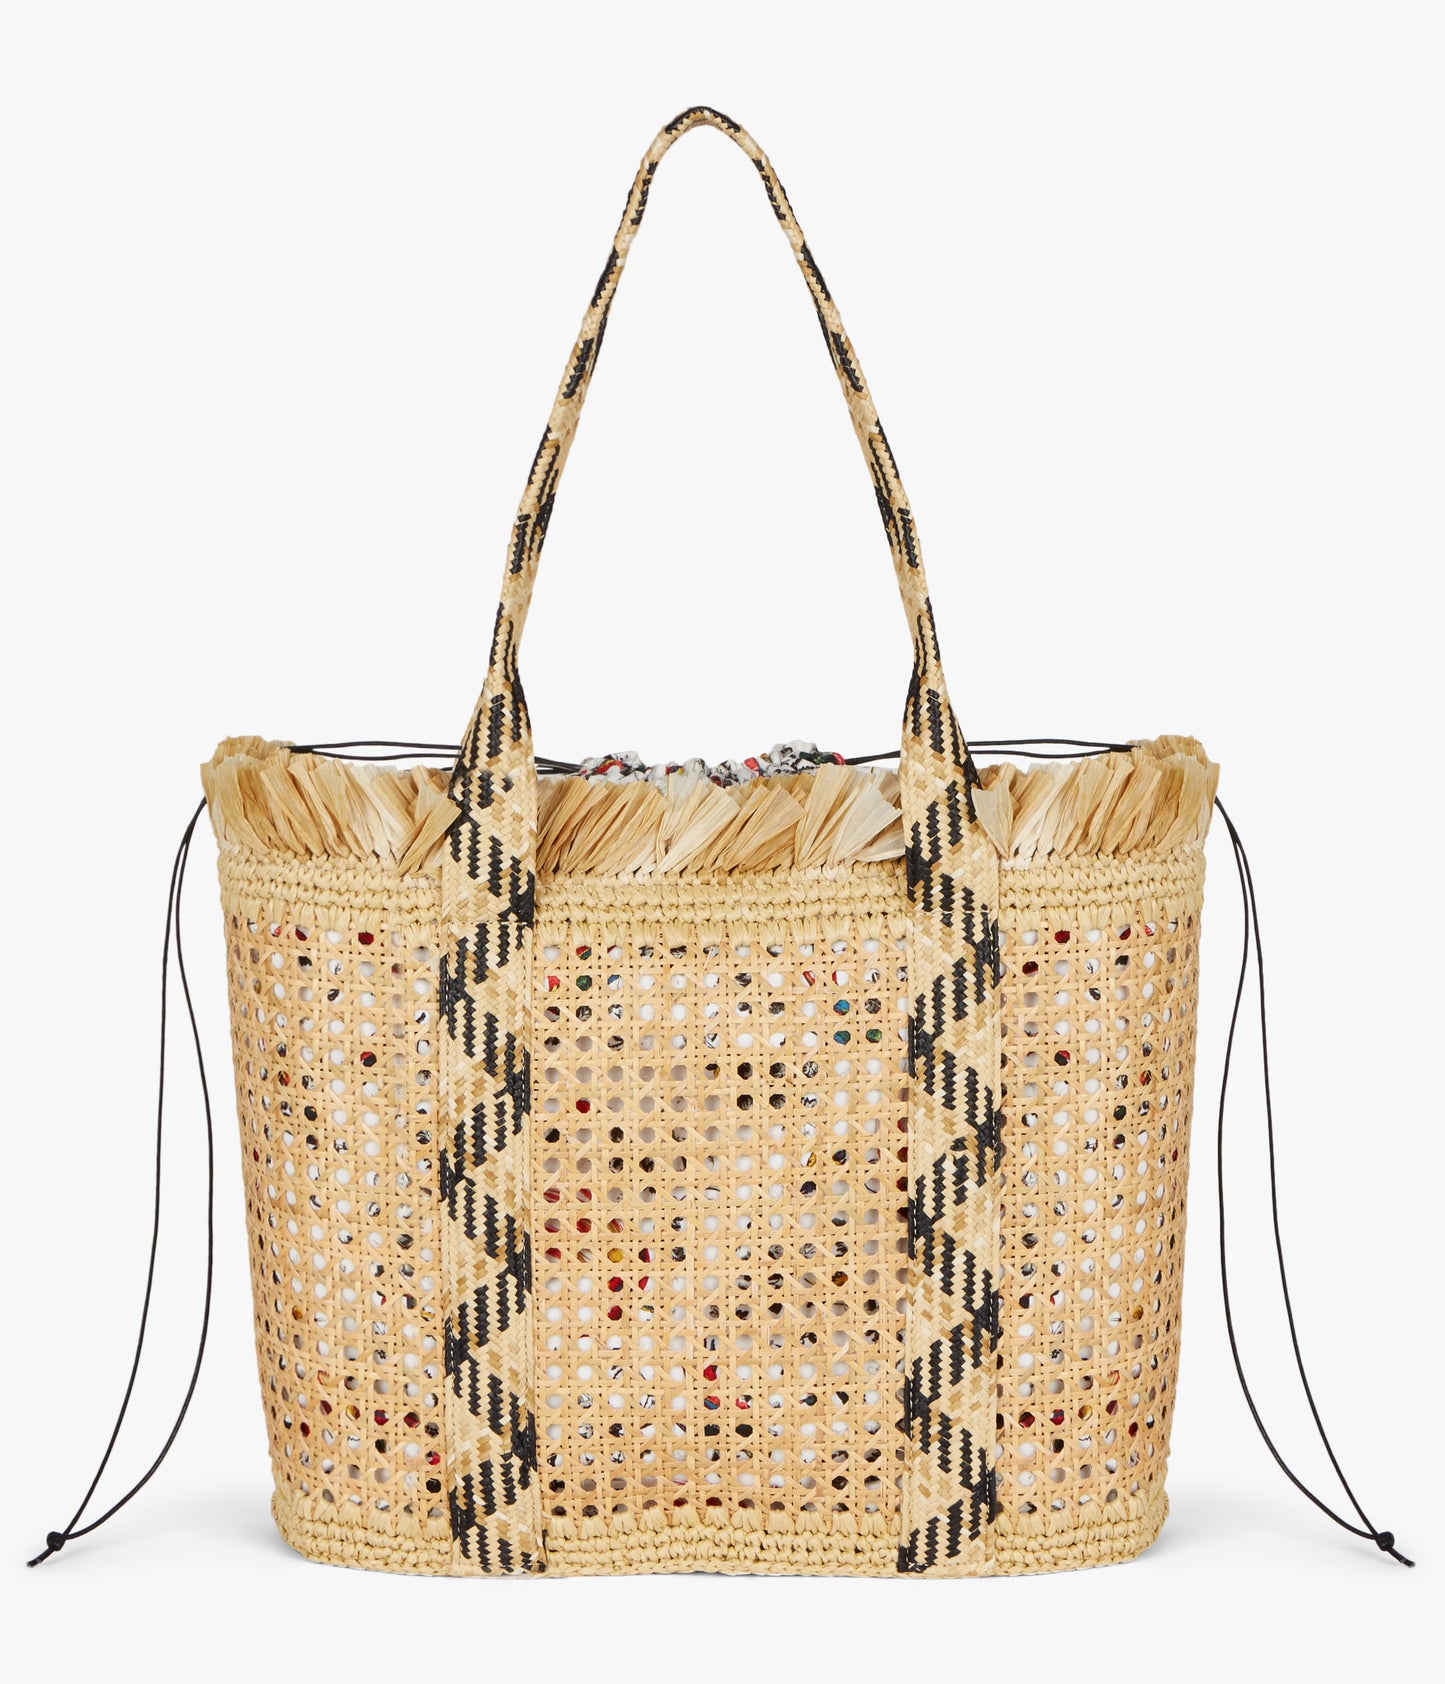 The perfect size for carrying your beach essentials this Large Straw Bag is a summertime failsafe.